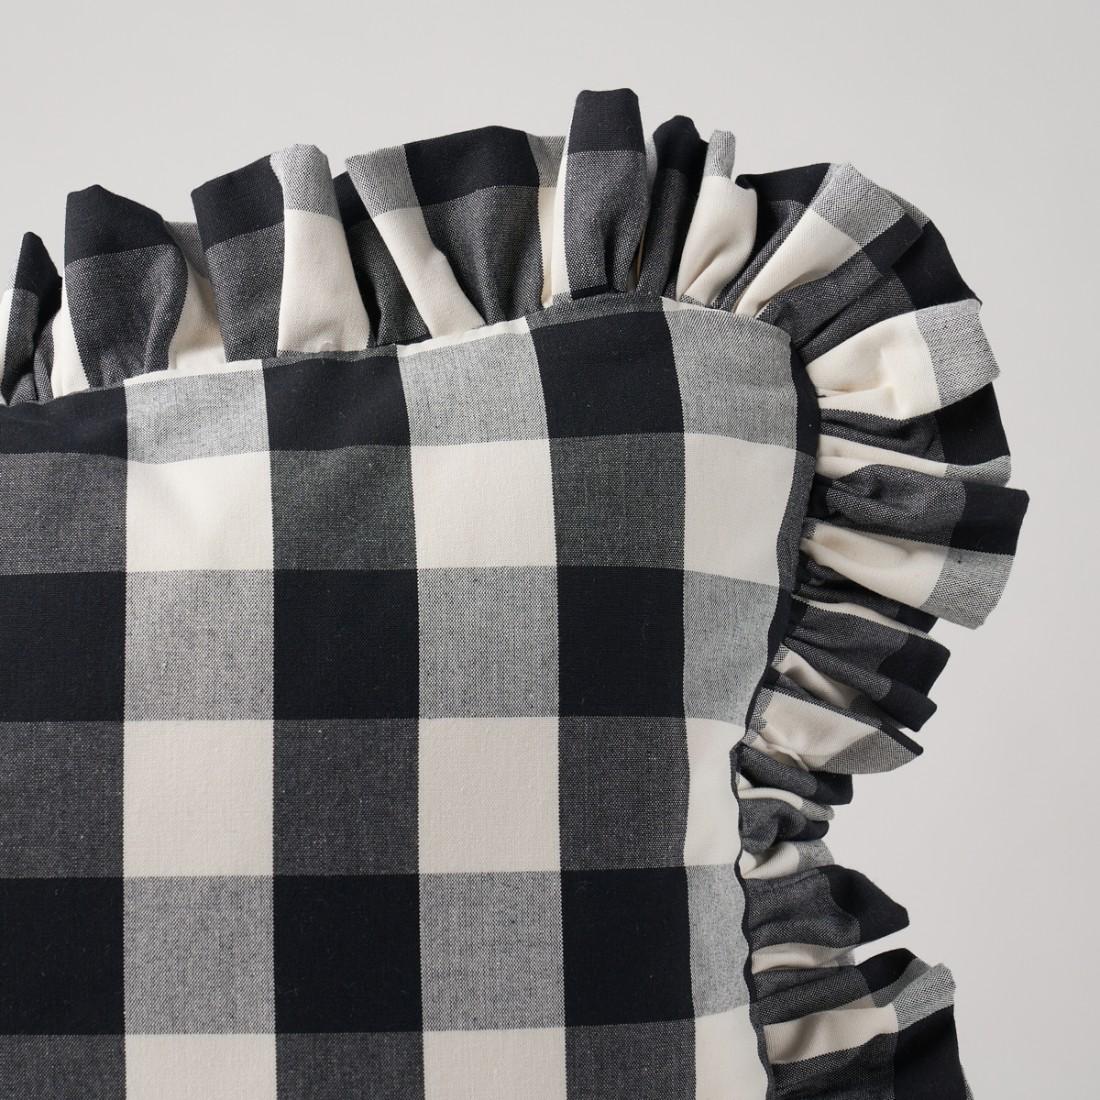 This pillow features Camden Cotton Check with a fringe finish. A classic one and a half-inch buffalo check, this woven cotton is a wonderful complement to both prints and plains. Pillow includes a feather/down fill insert and hidden zipper